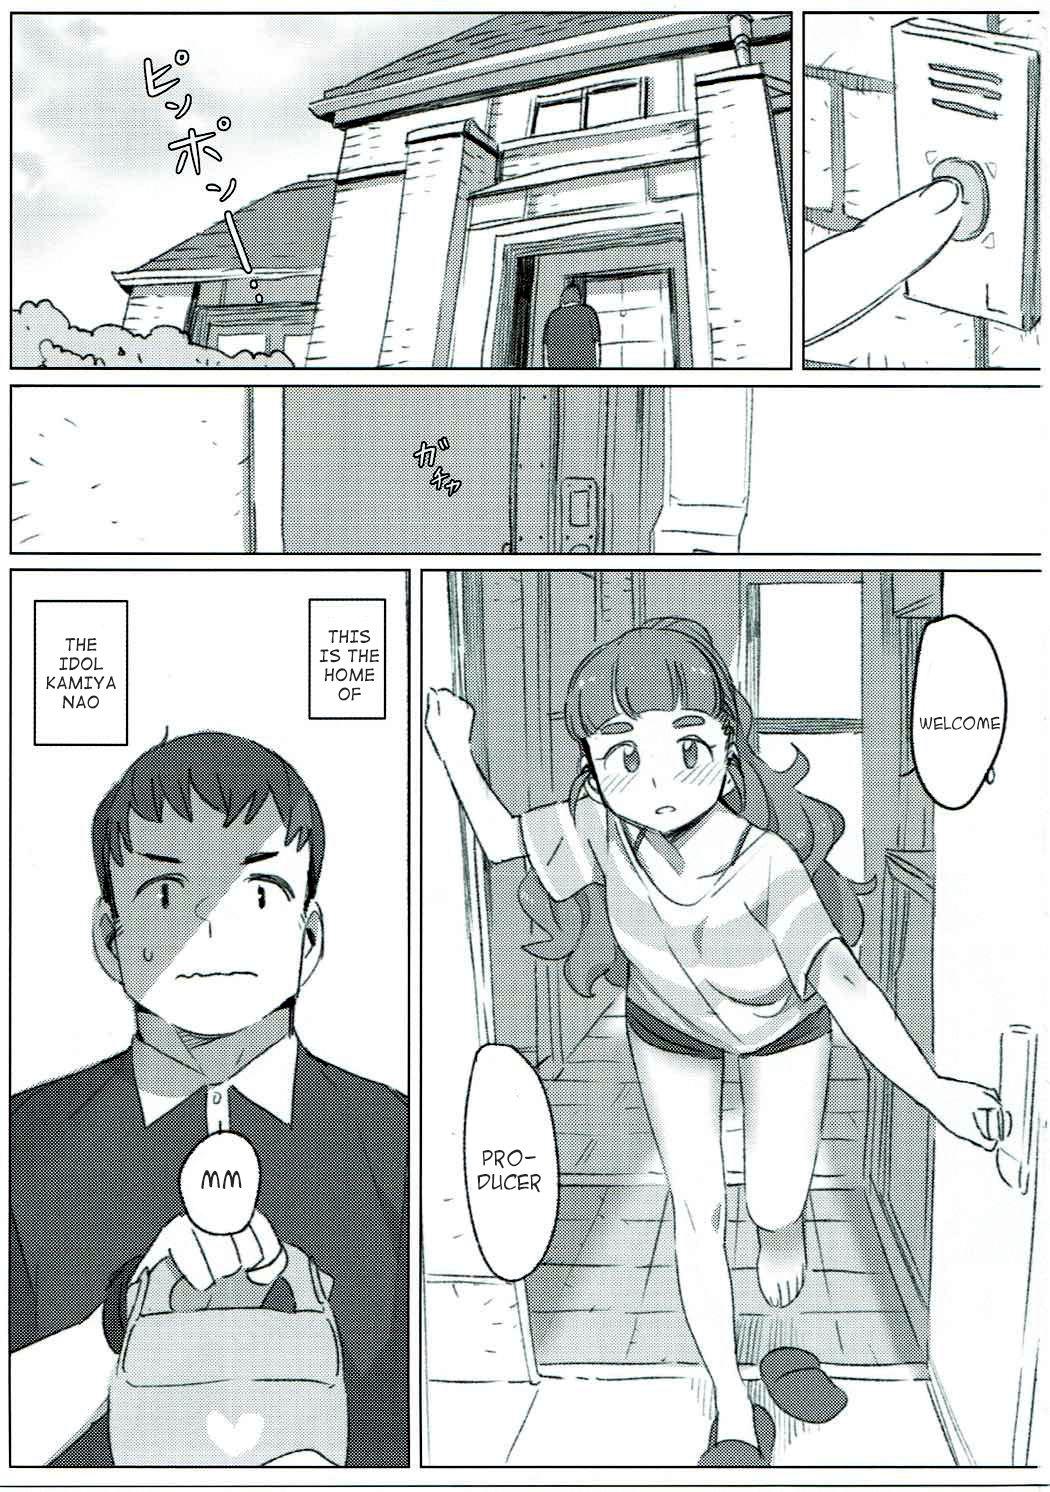 Sucking Tada, Aishiteiru Sore dake no Hanashi | I Just Love Her, That's All There Is - The idolmaster Old And Young - Page 2